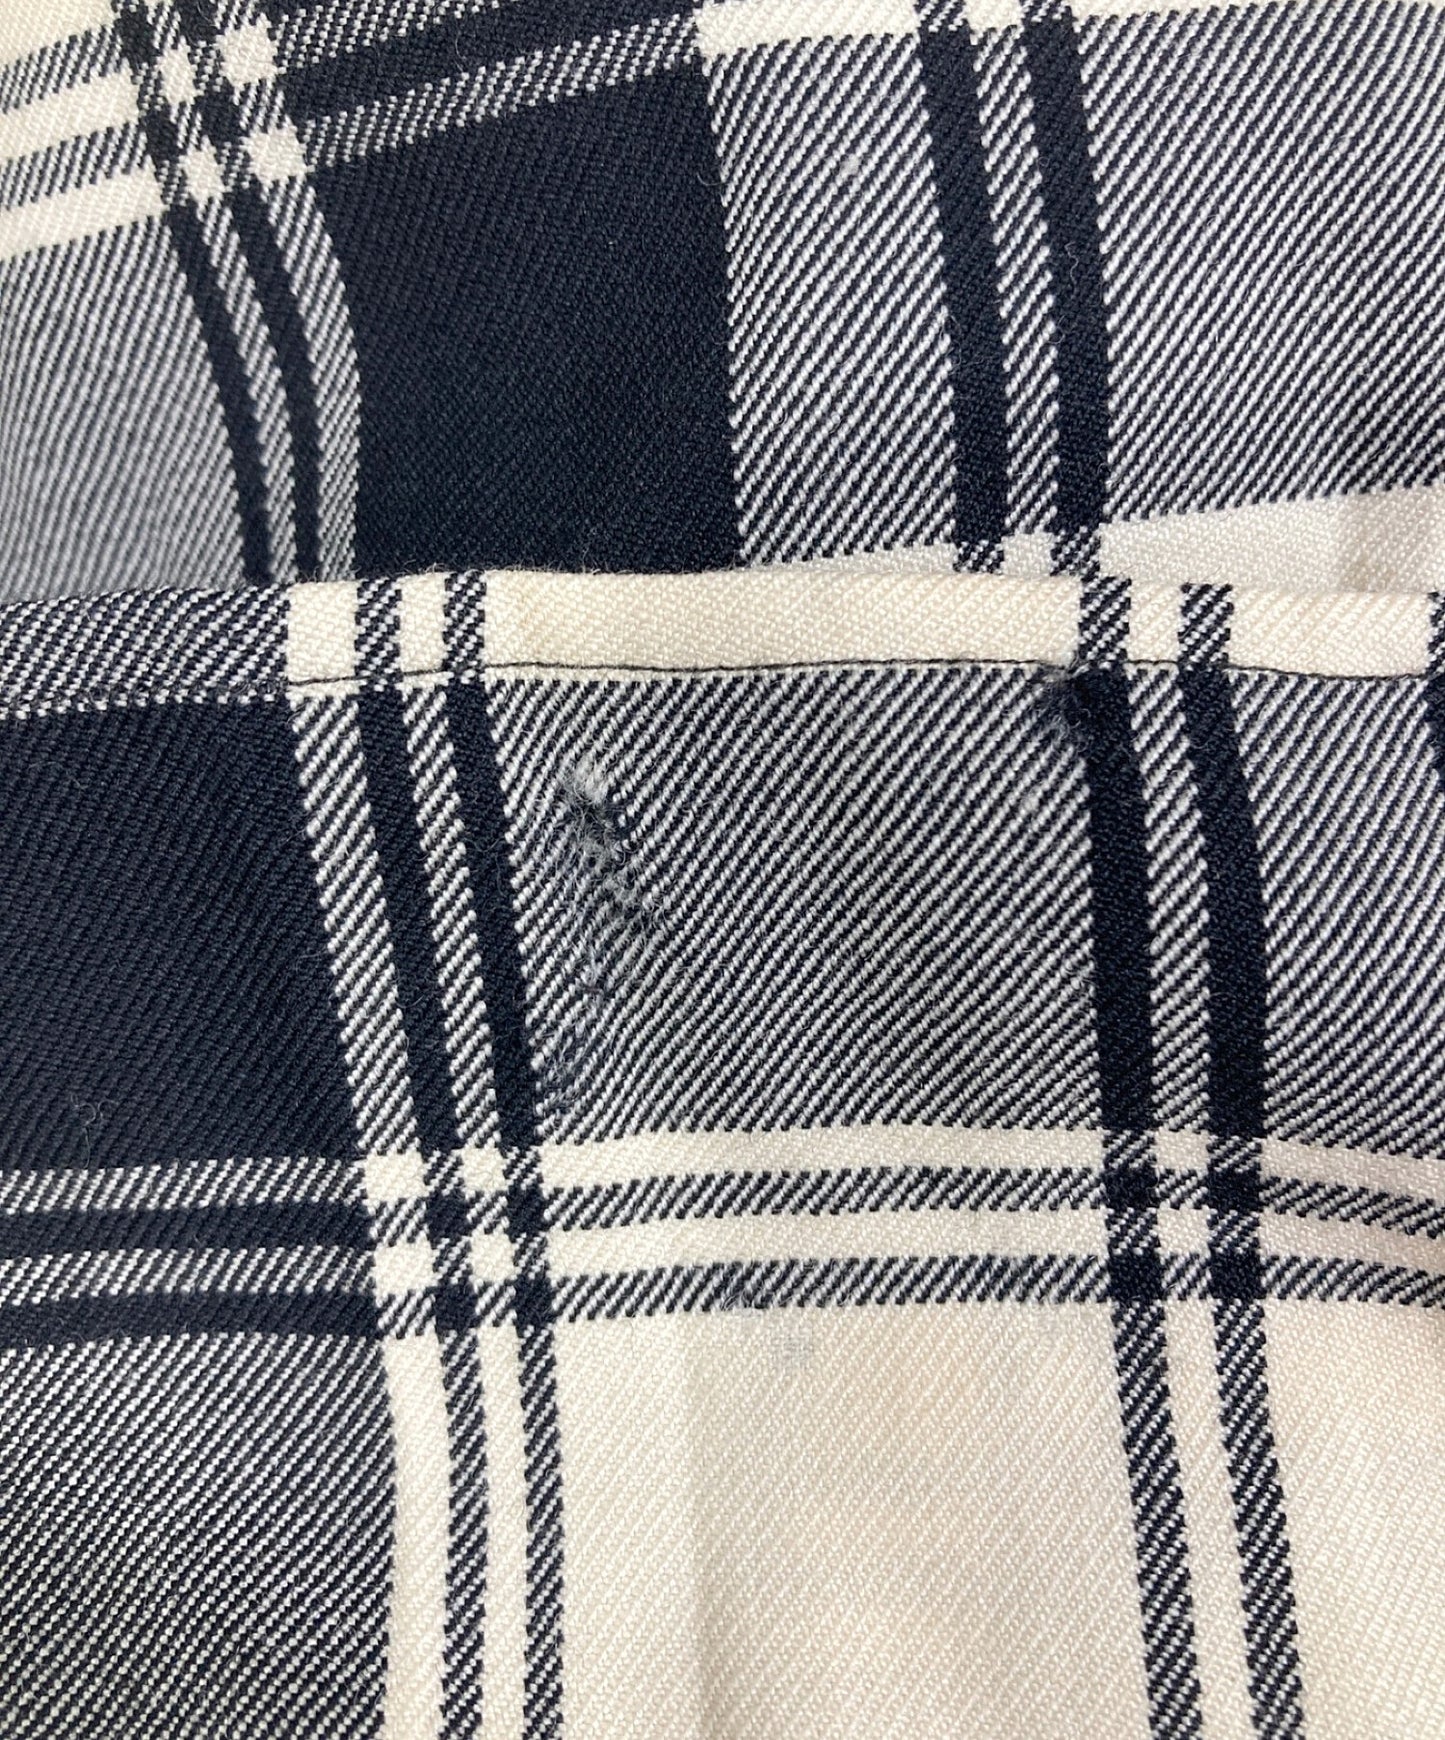 [Pre-owned] Yohji Yamamoto pour homme old check jacket